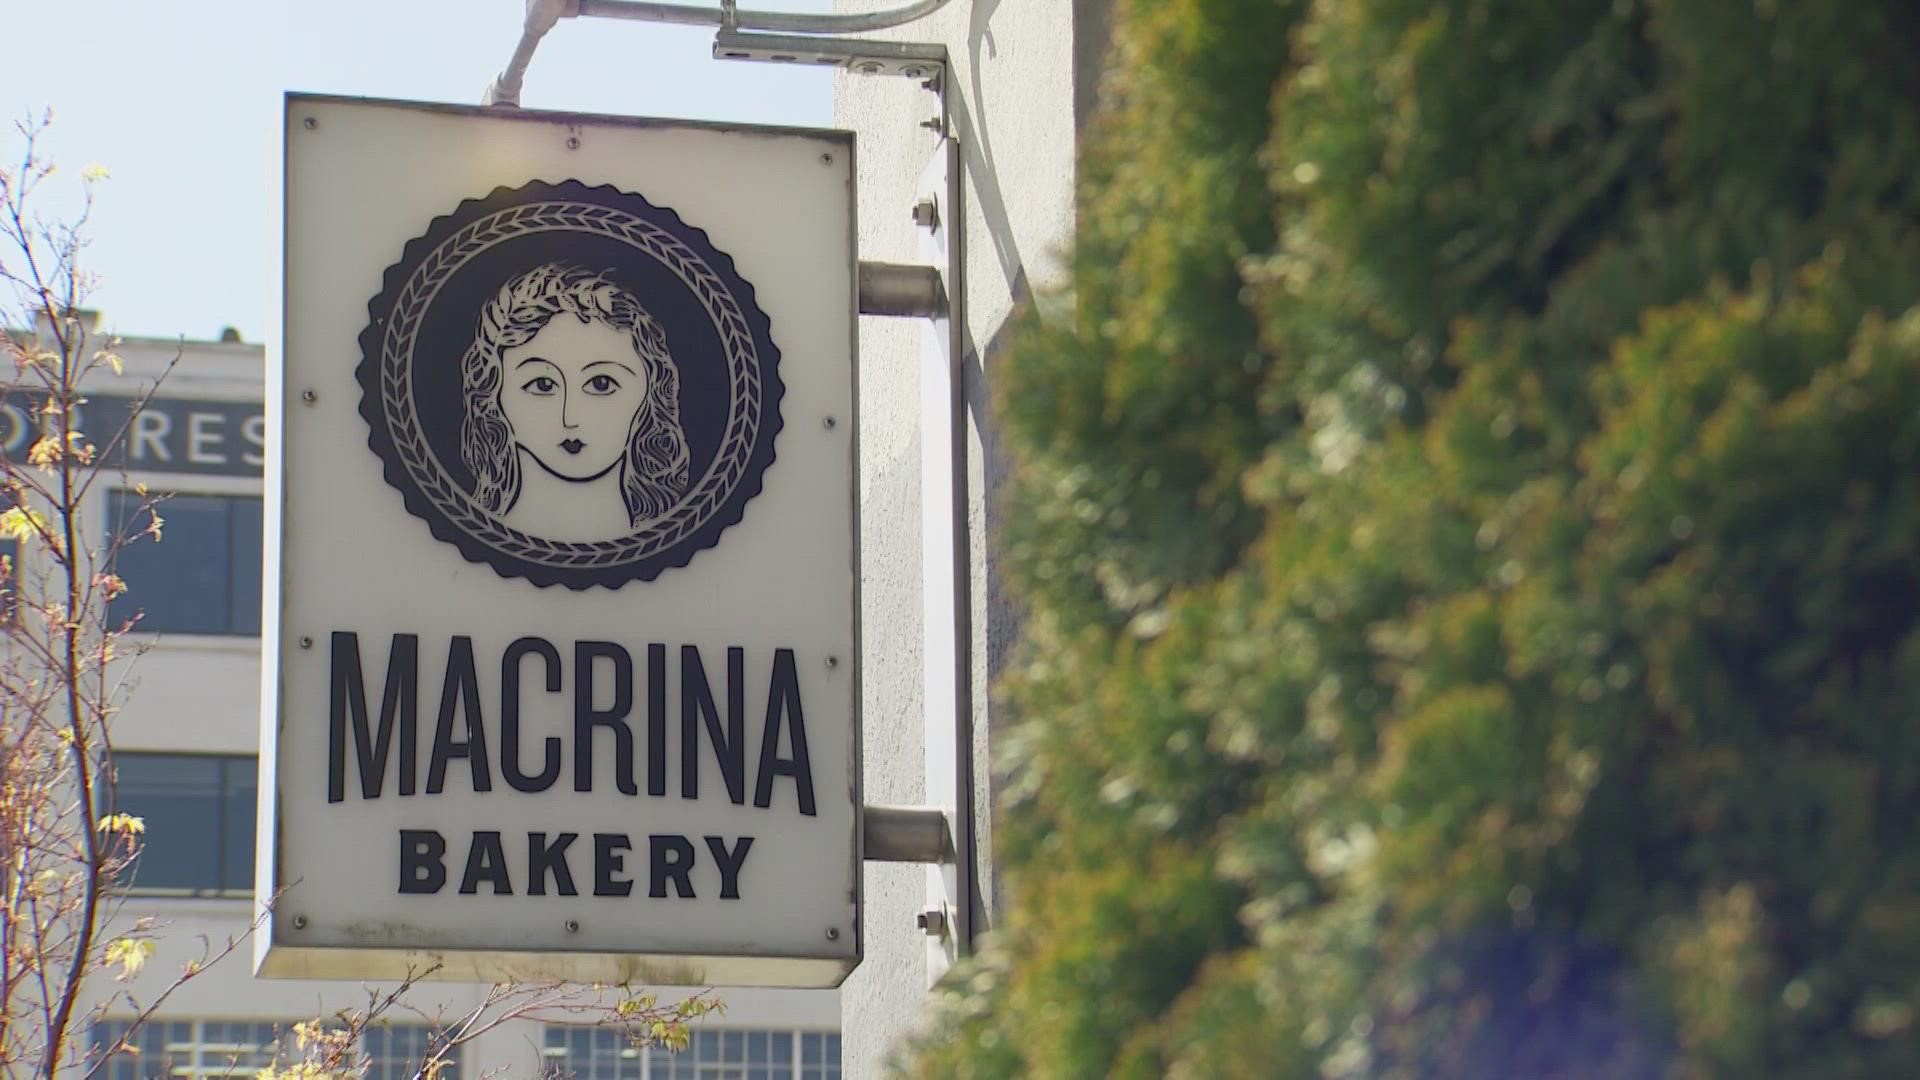 When a Ukrainian bakery started running out of flour, a local bakery stepped in to help.